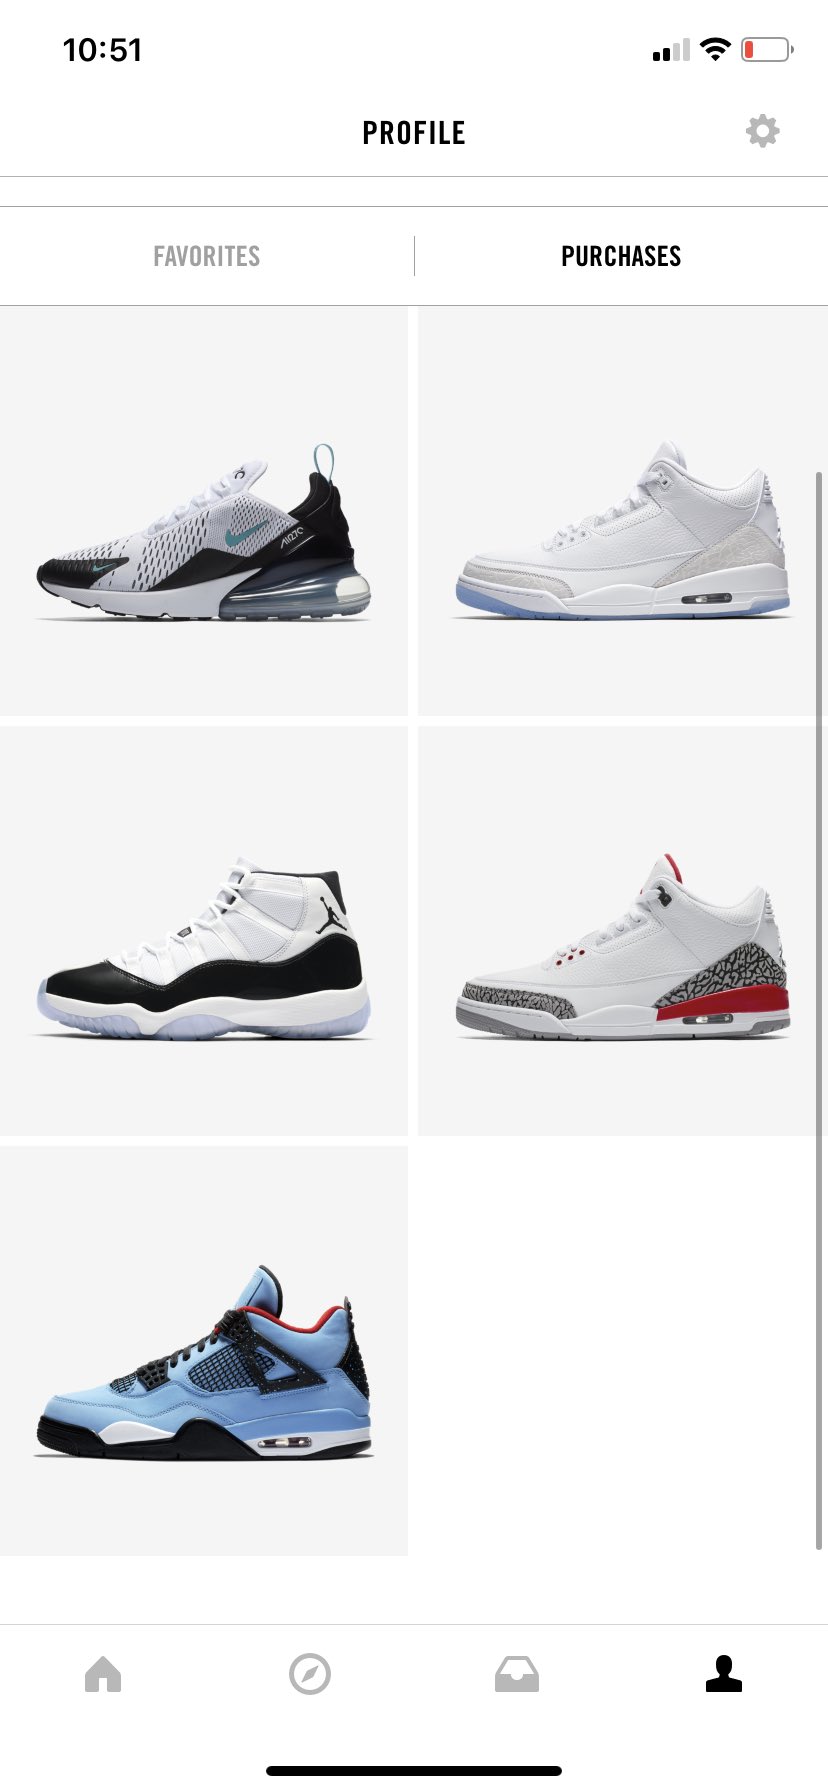 Just Did It My long road to redemption on Nike’s SNKRS app